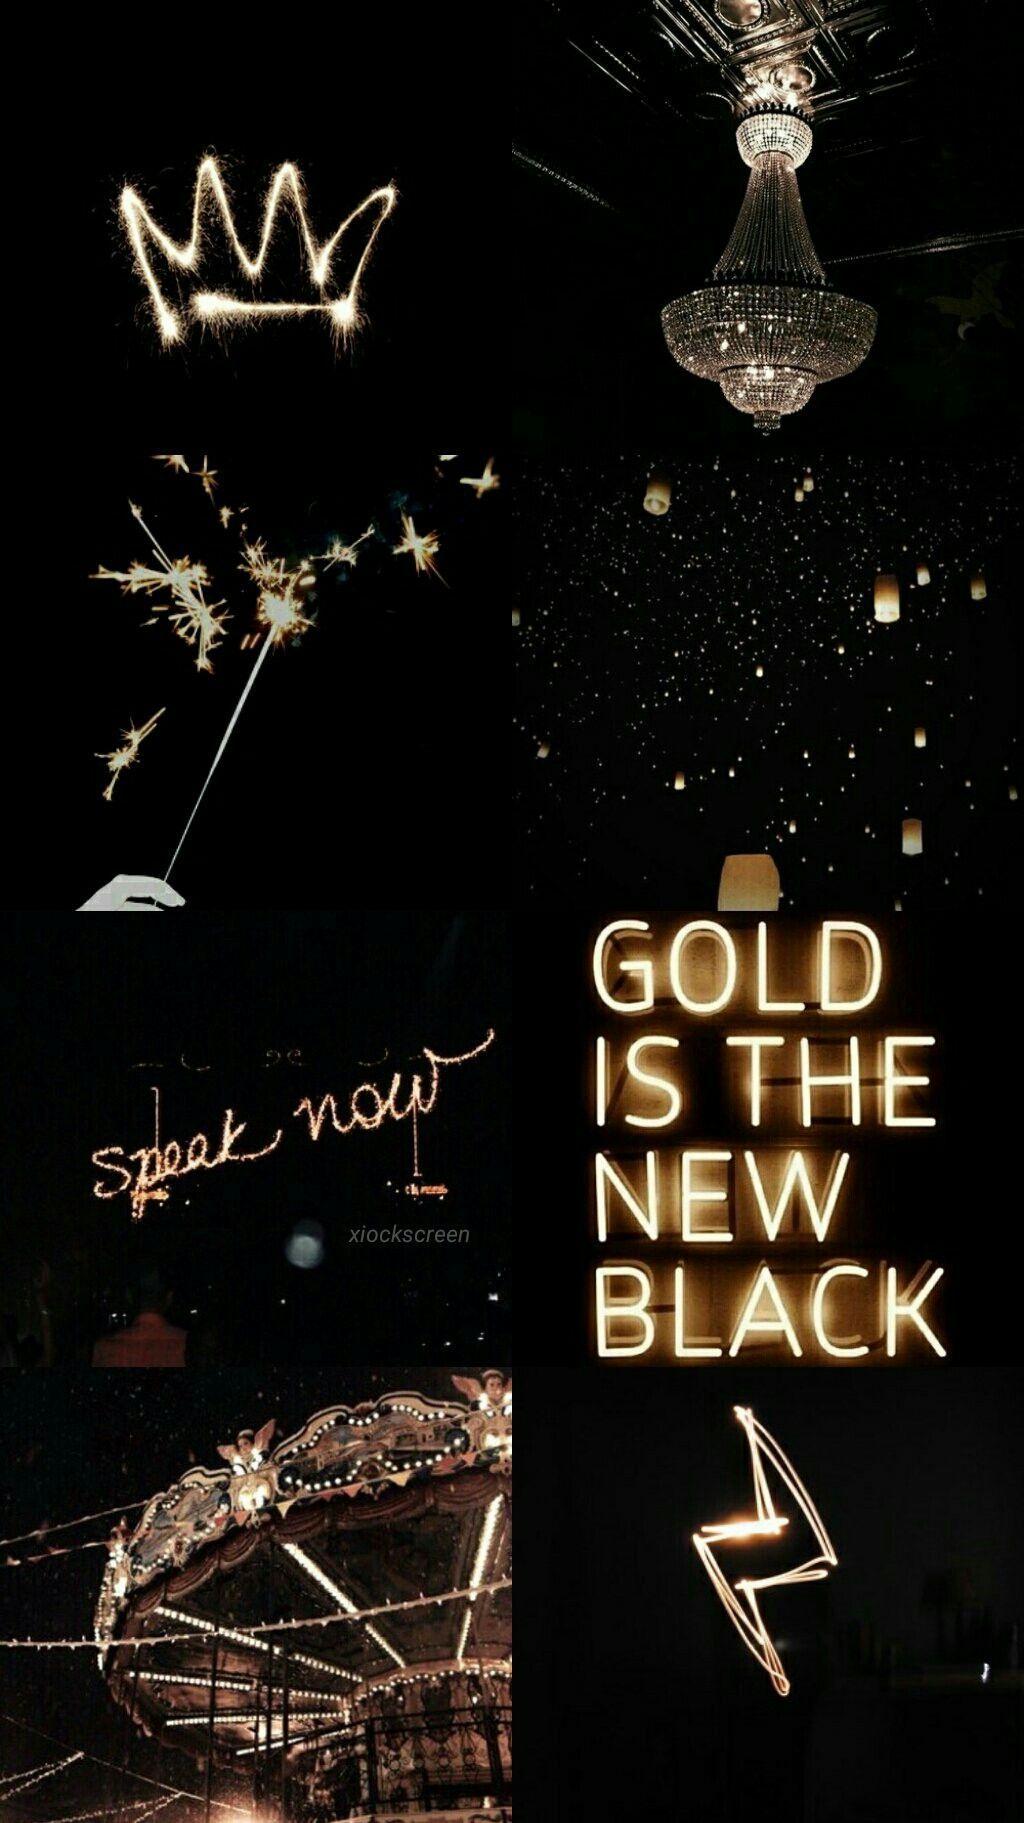 Black and Gold Aesthetic Wallpaper Free Black and Gold Aesthetic Background